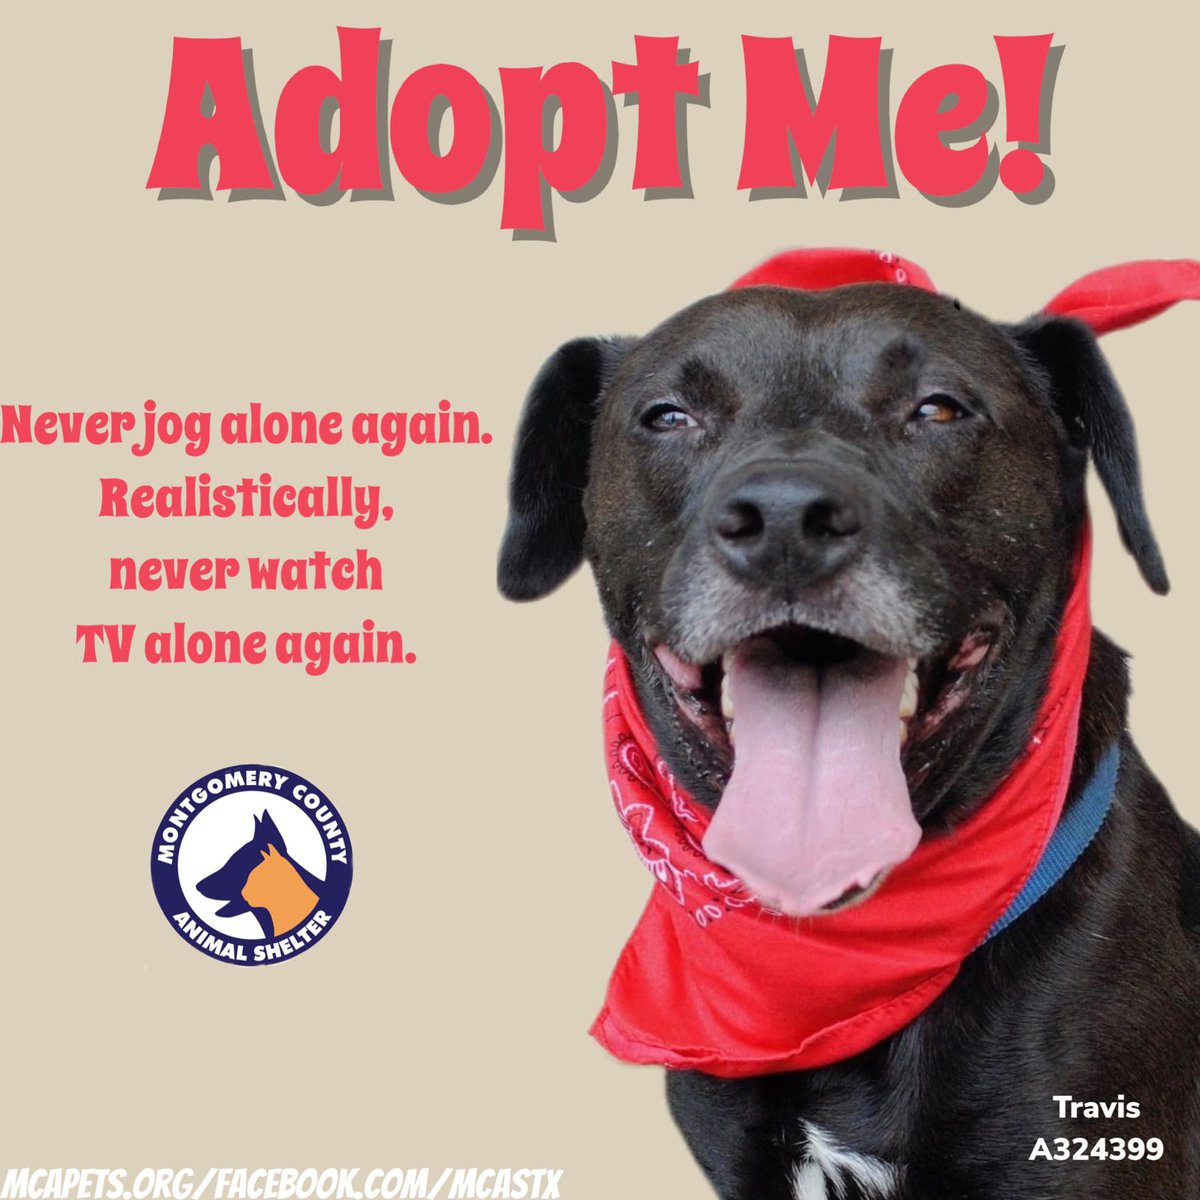 Curling up next to your pup watching your favorite television show is the best! Travis would be happy to curl up next to you on a couch and he hopes you adopt him! Travis is a 6 year old, neutered lab mix waiting for his forever family. bit.ly/mcasTRAVIS #thewoodlandstx